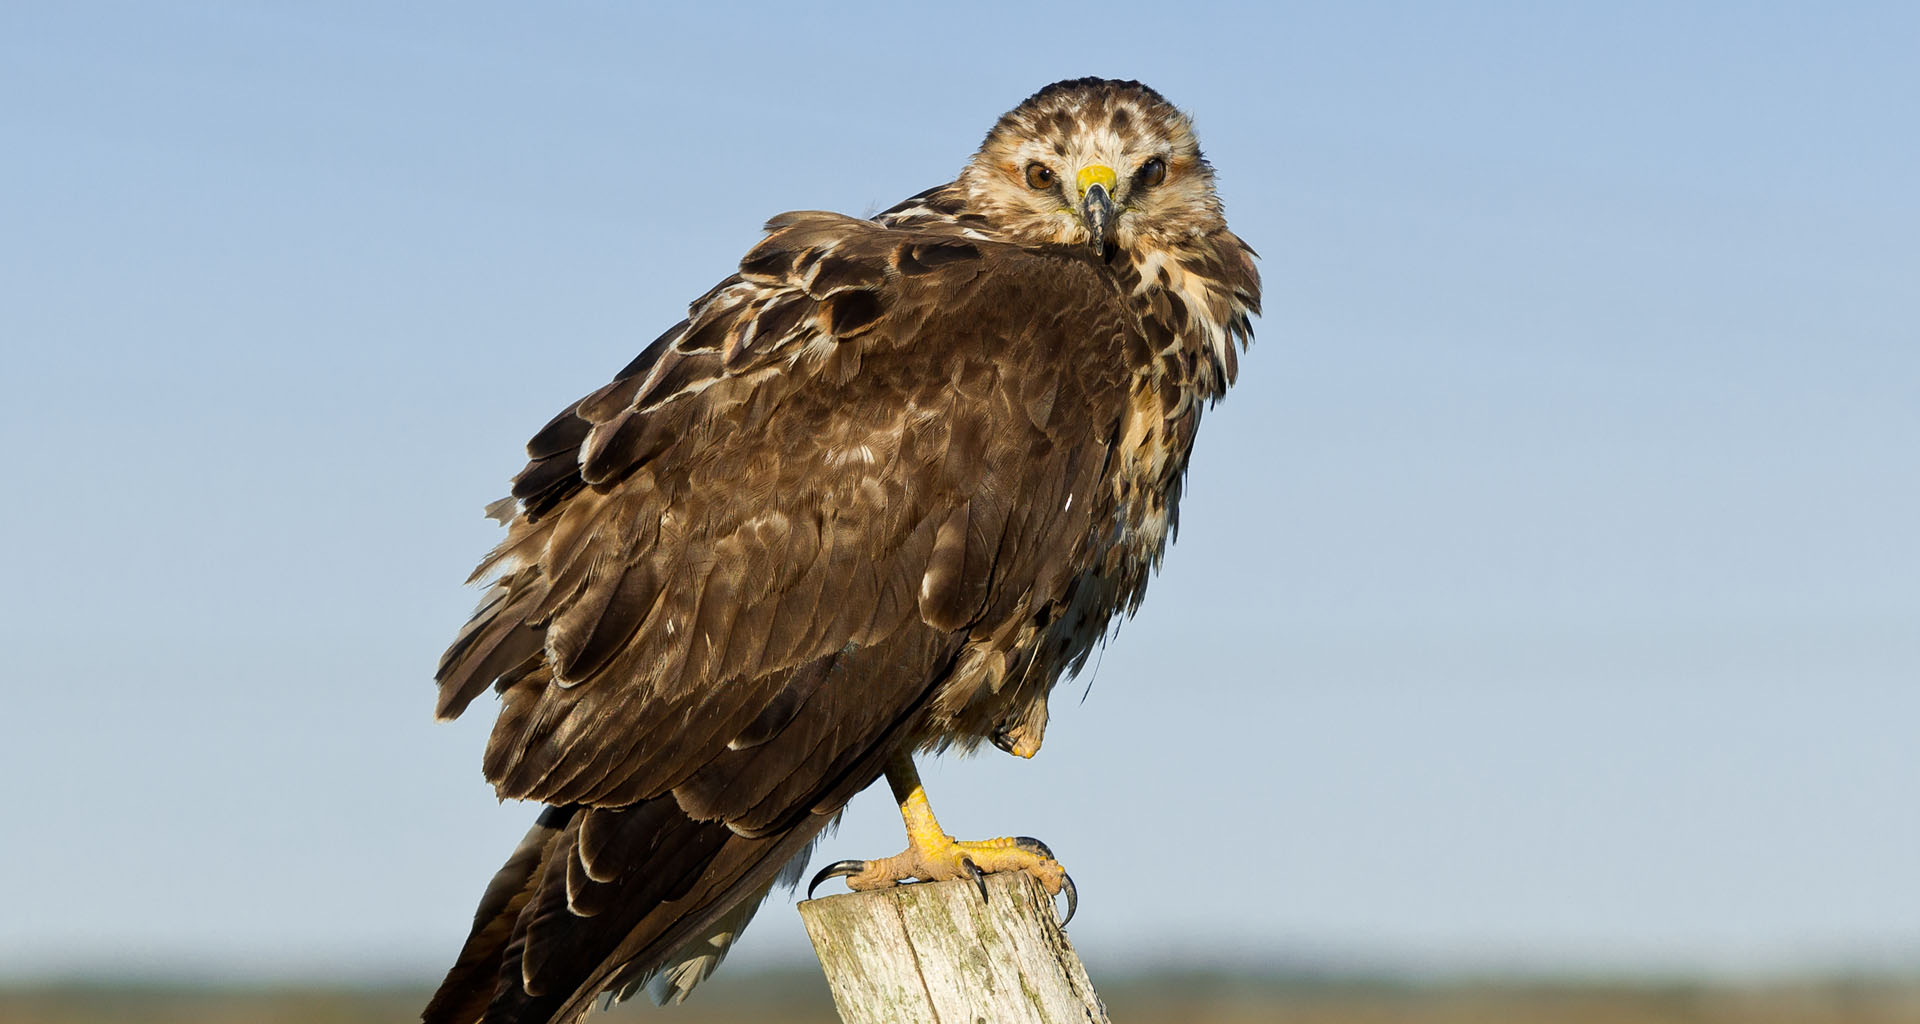 A juvenile northern harrier looking directly at the camera